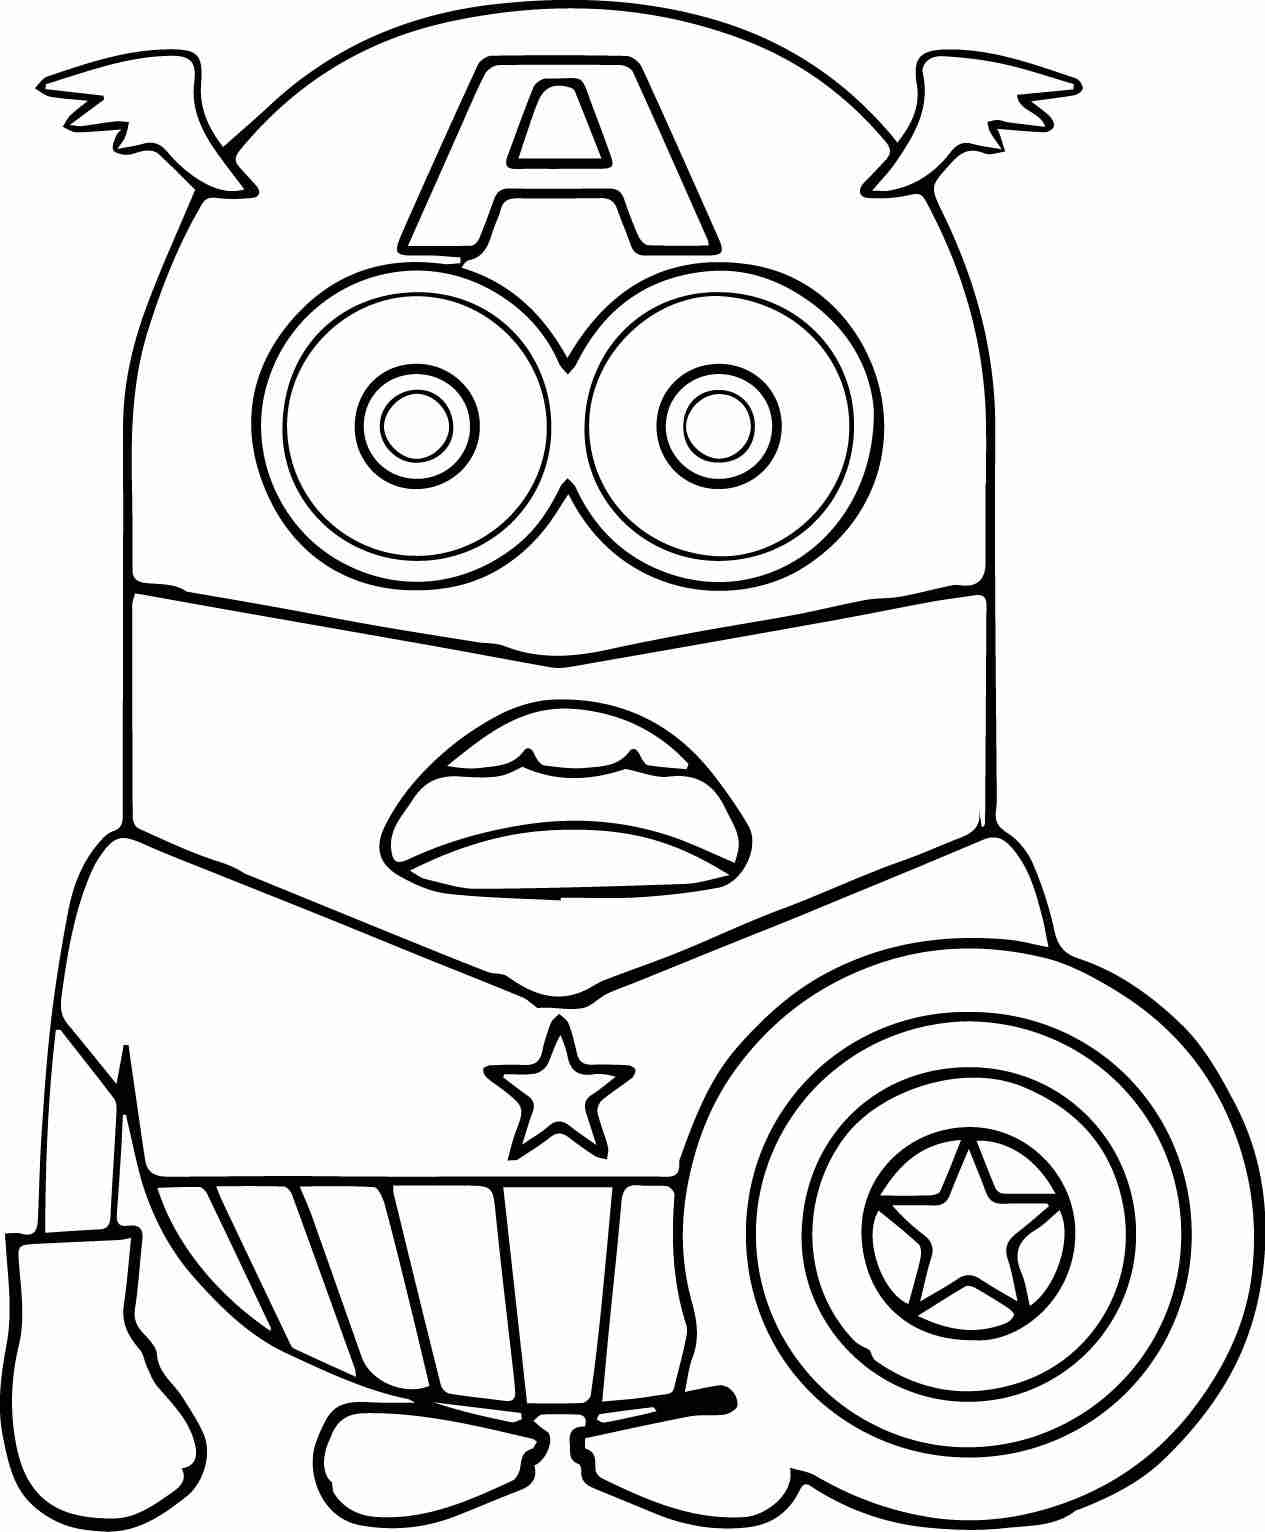 Minions Coloring Pages Pdf at GetColorings.com | Free ...